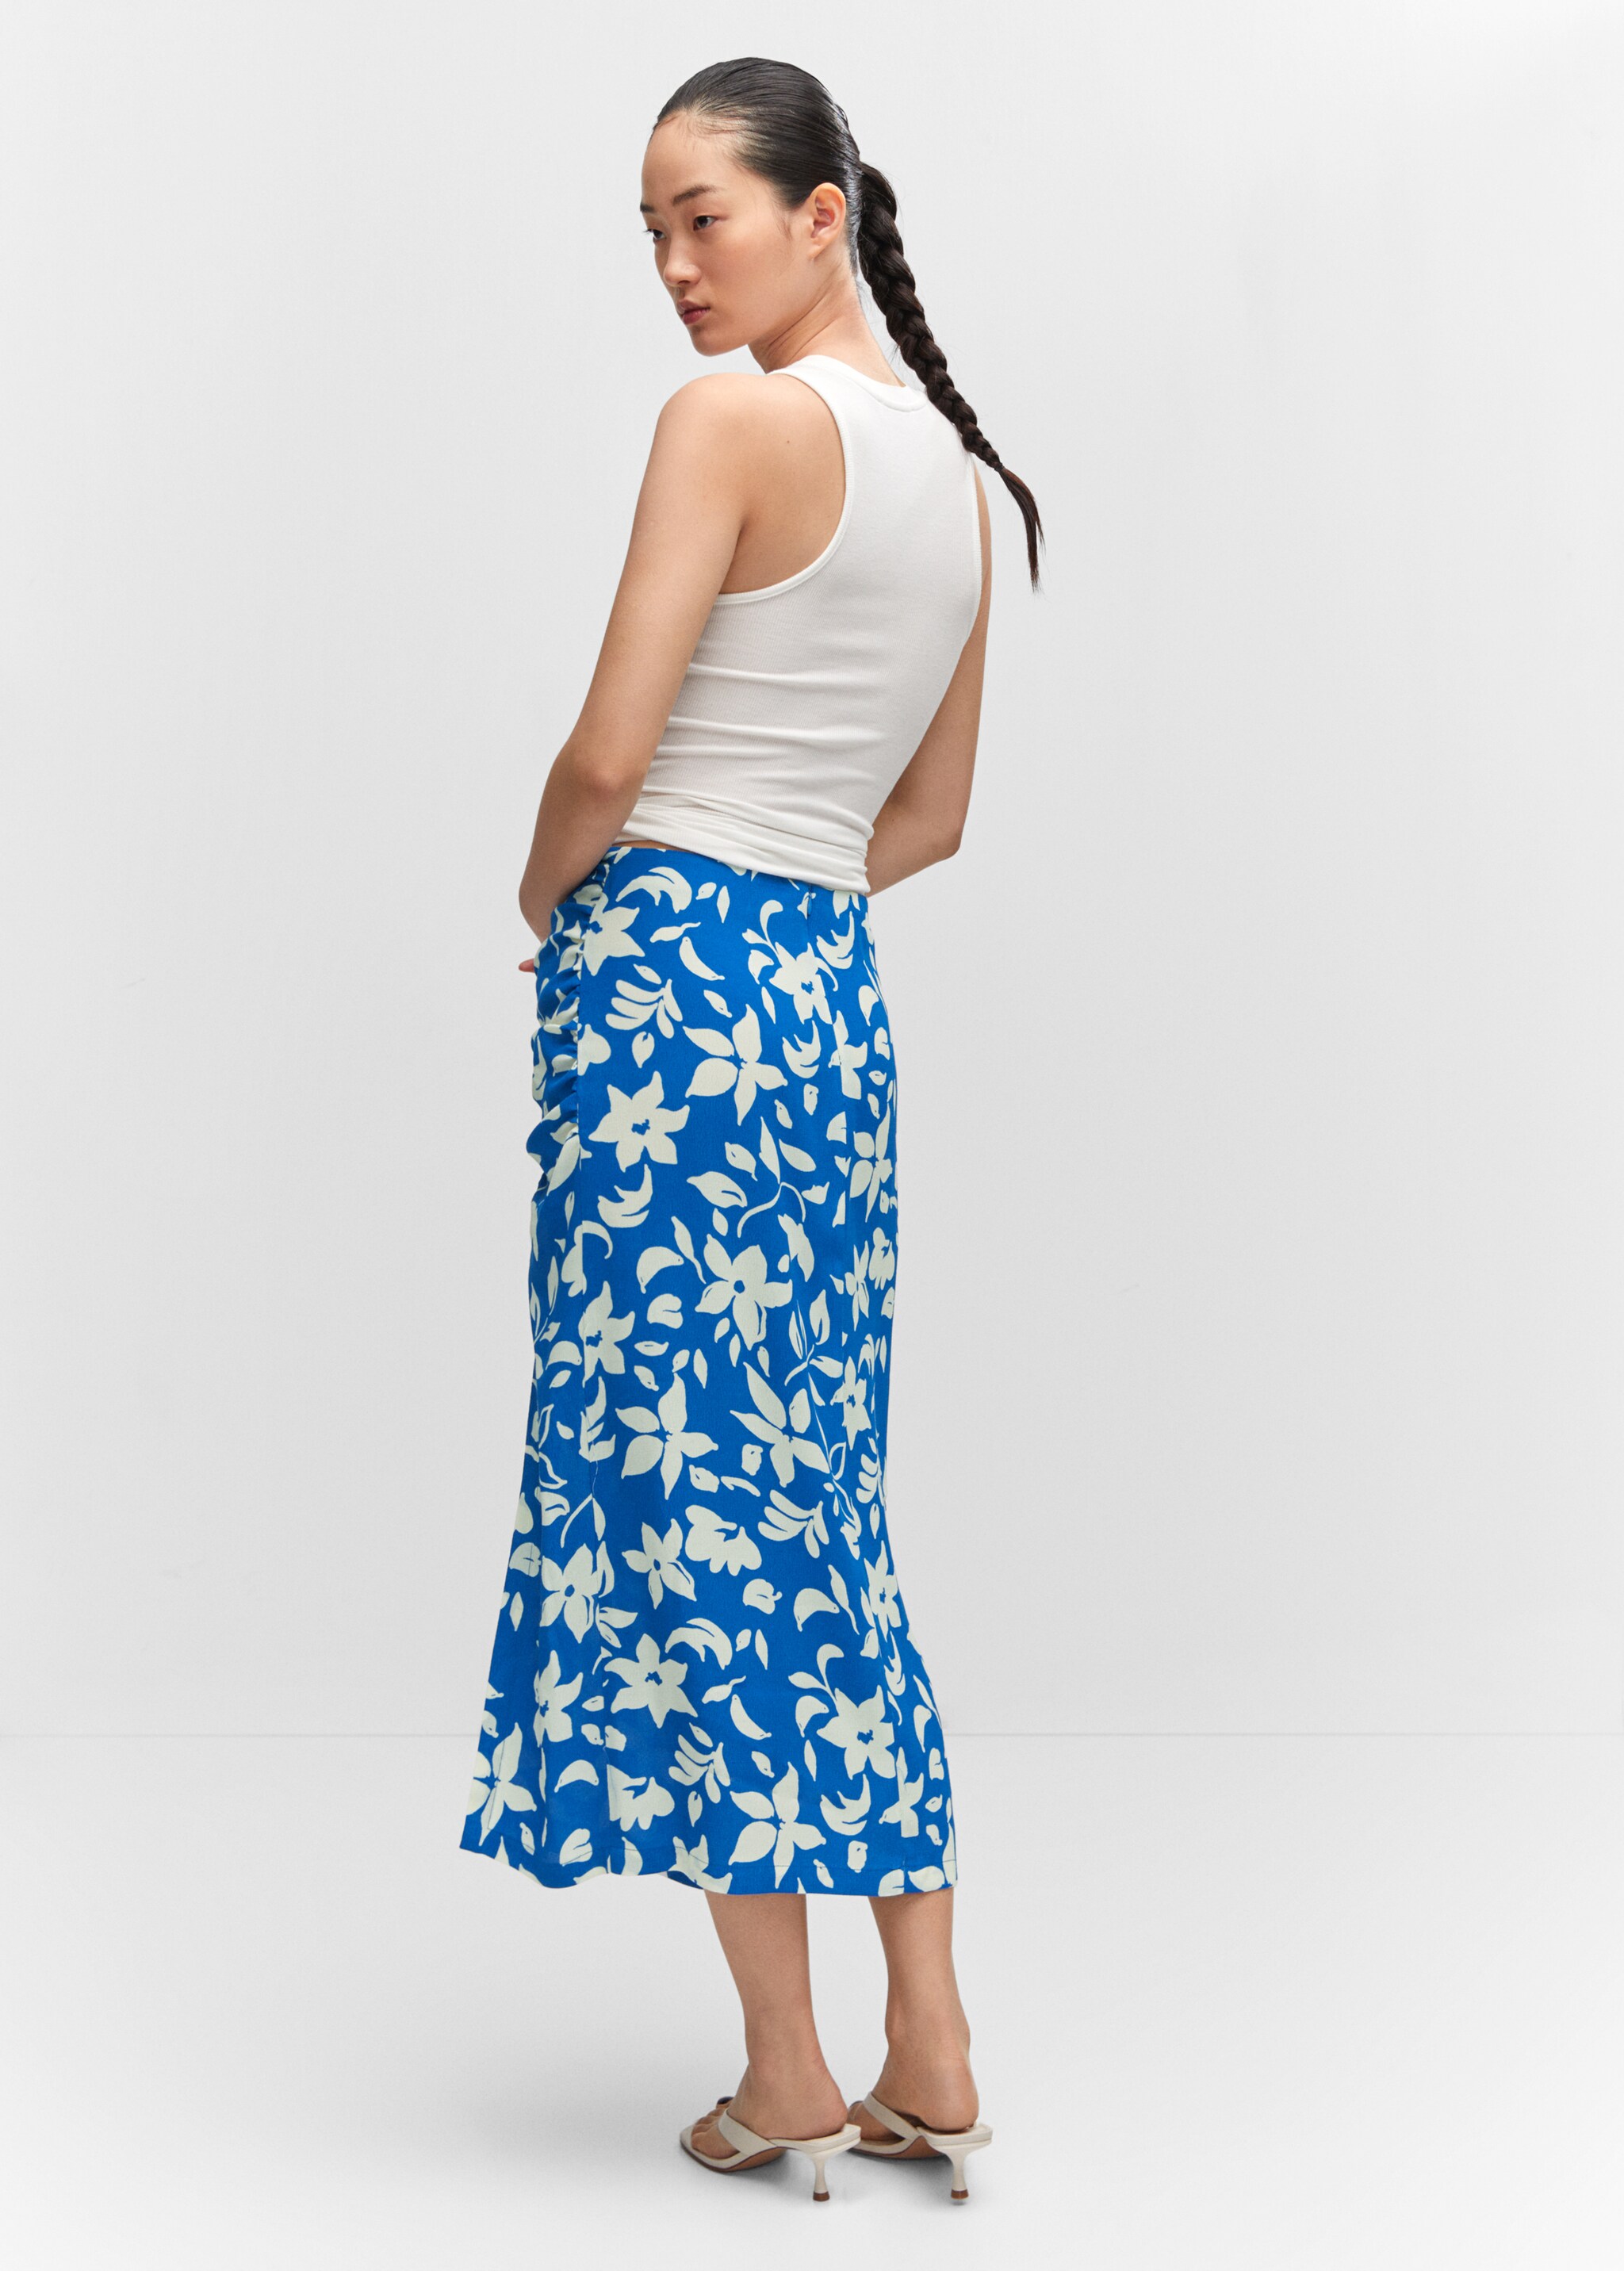 Printed skirt with slit - Reverse of the article